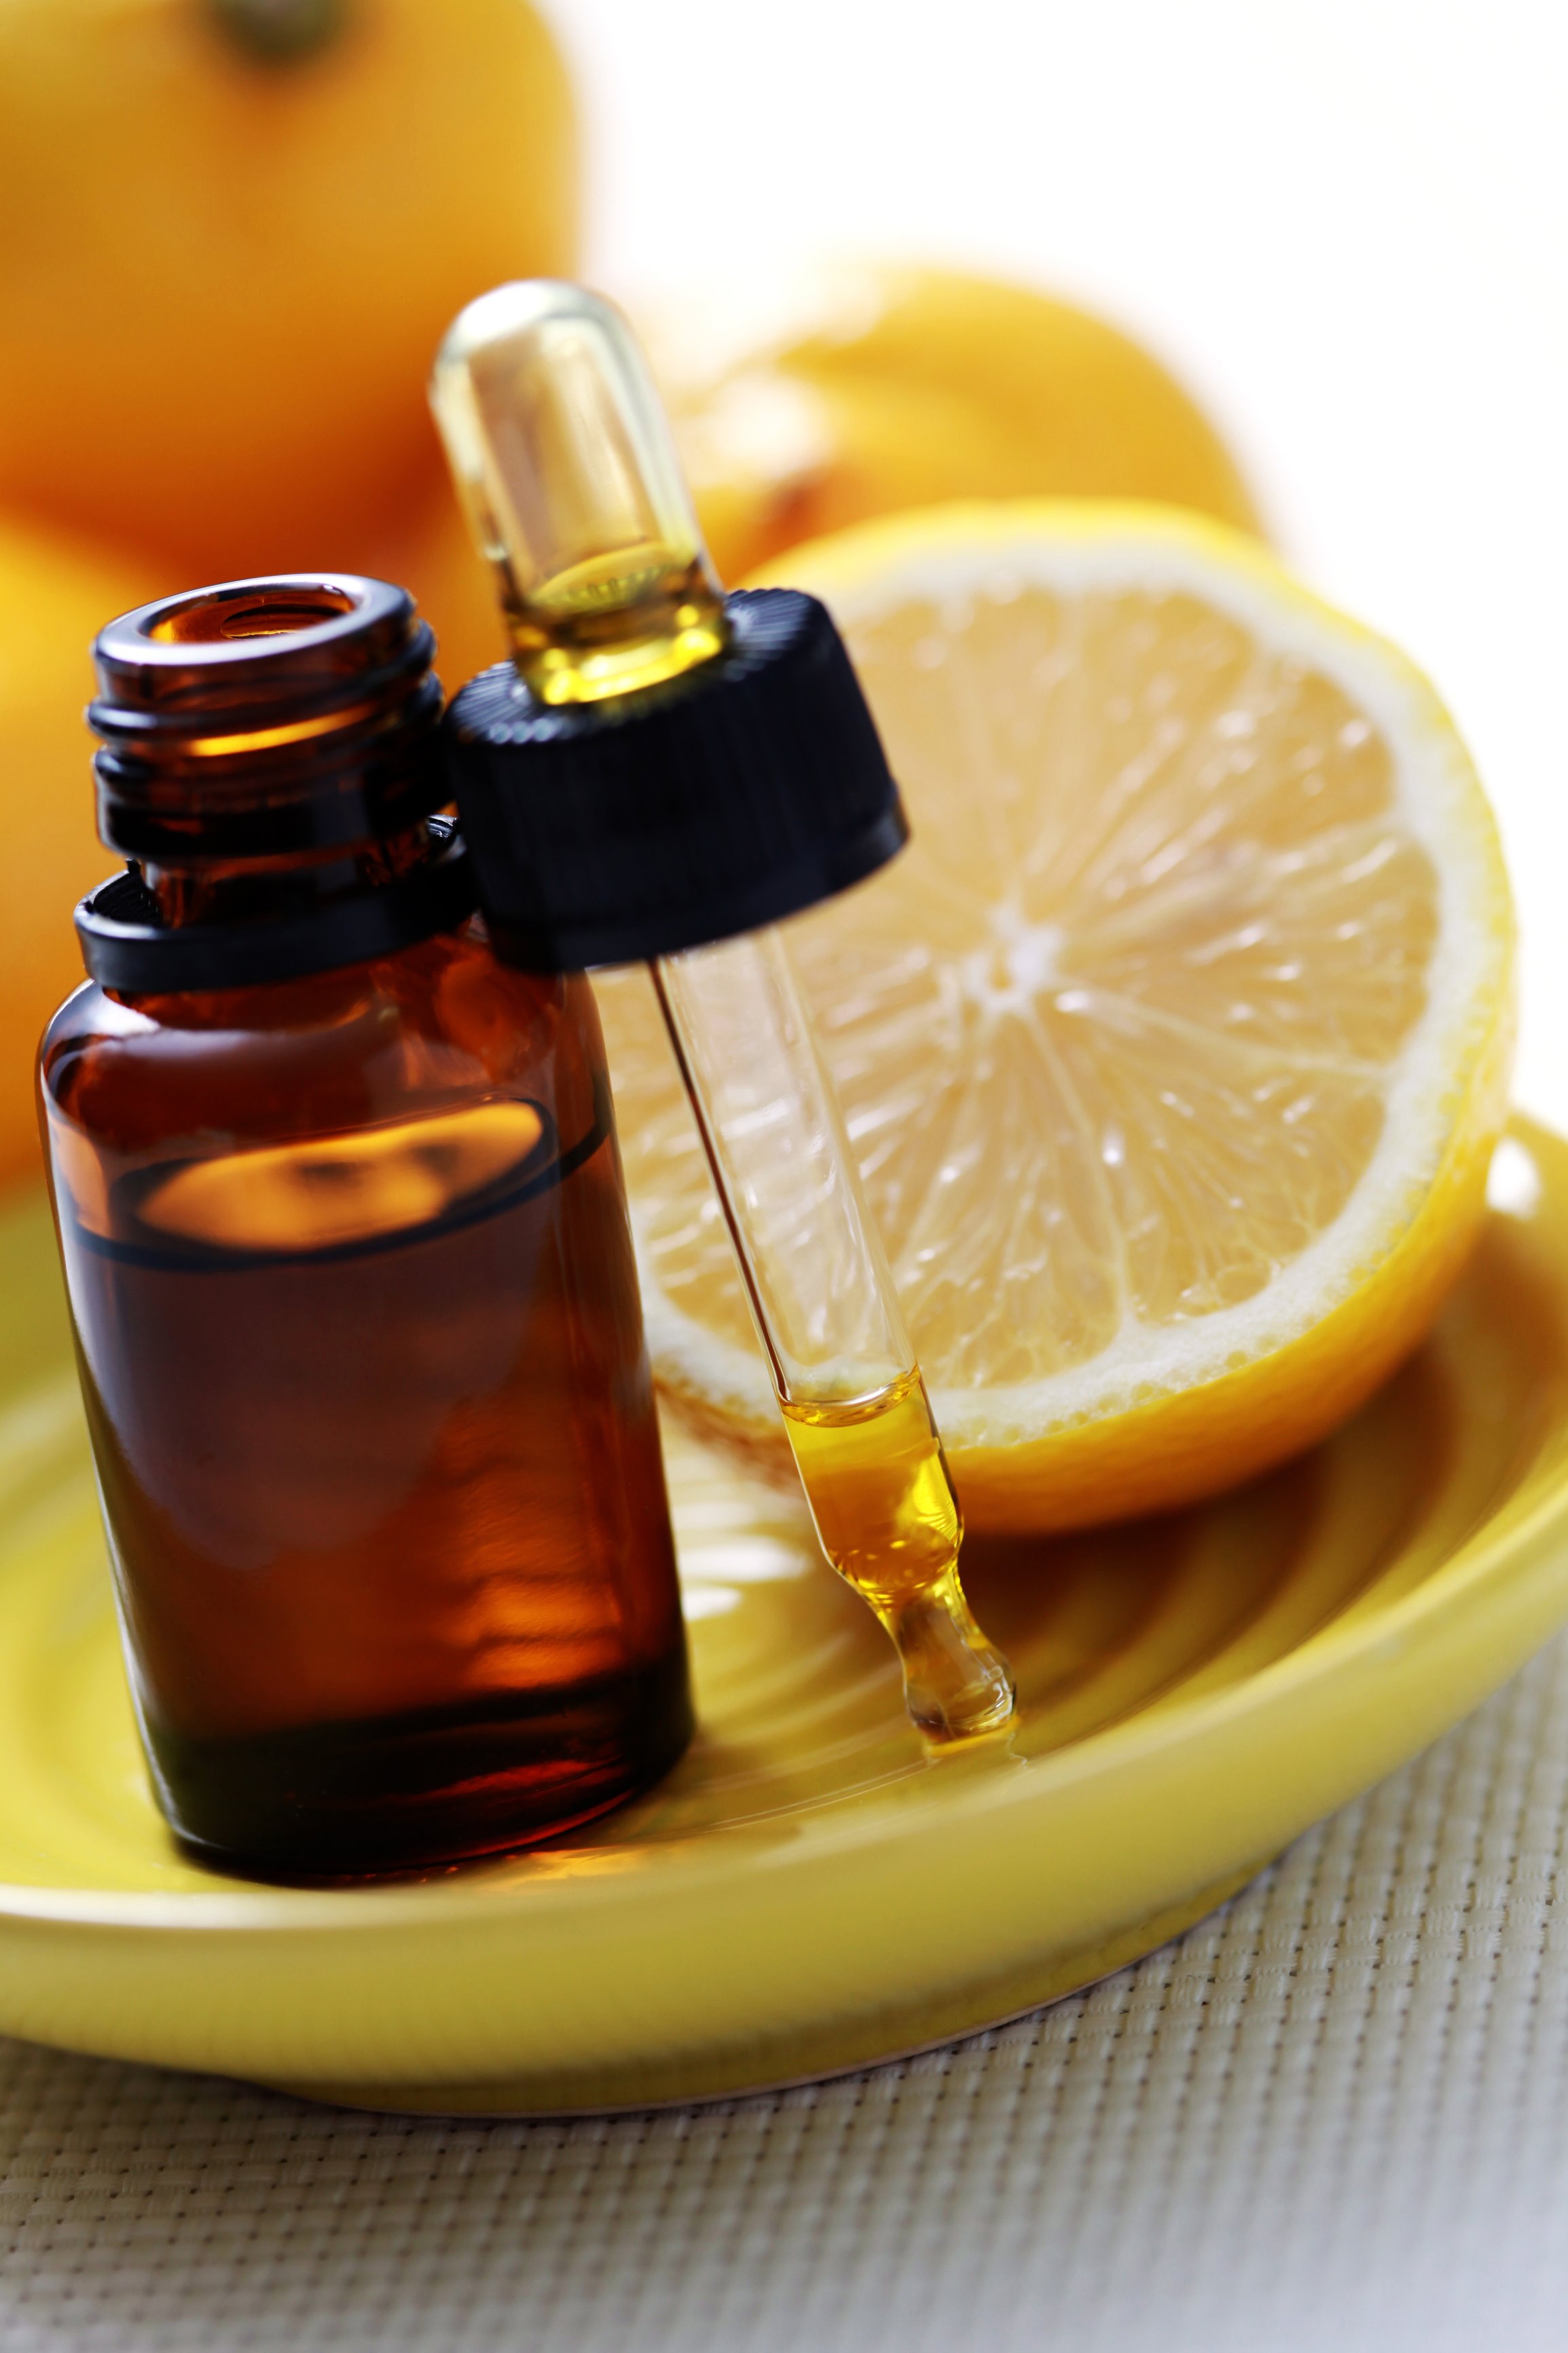 Lemon Essential Oil: The Great Cleanser.